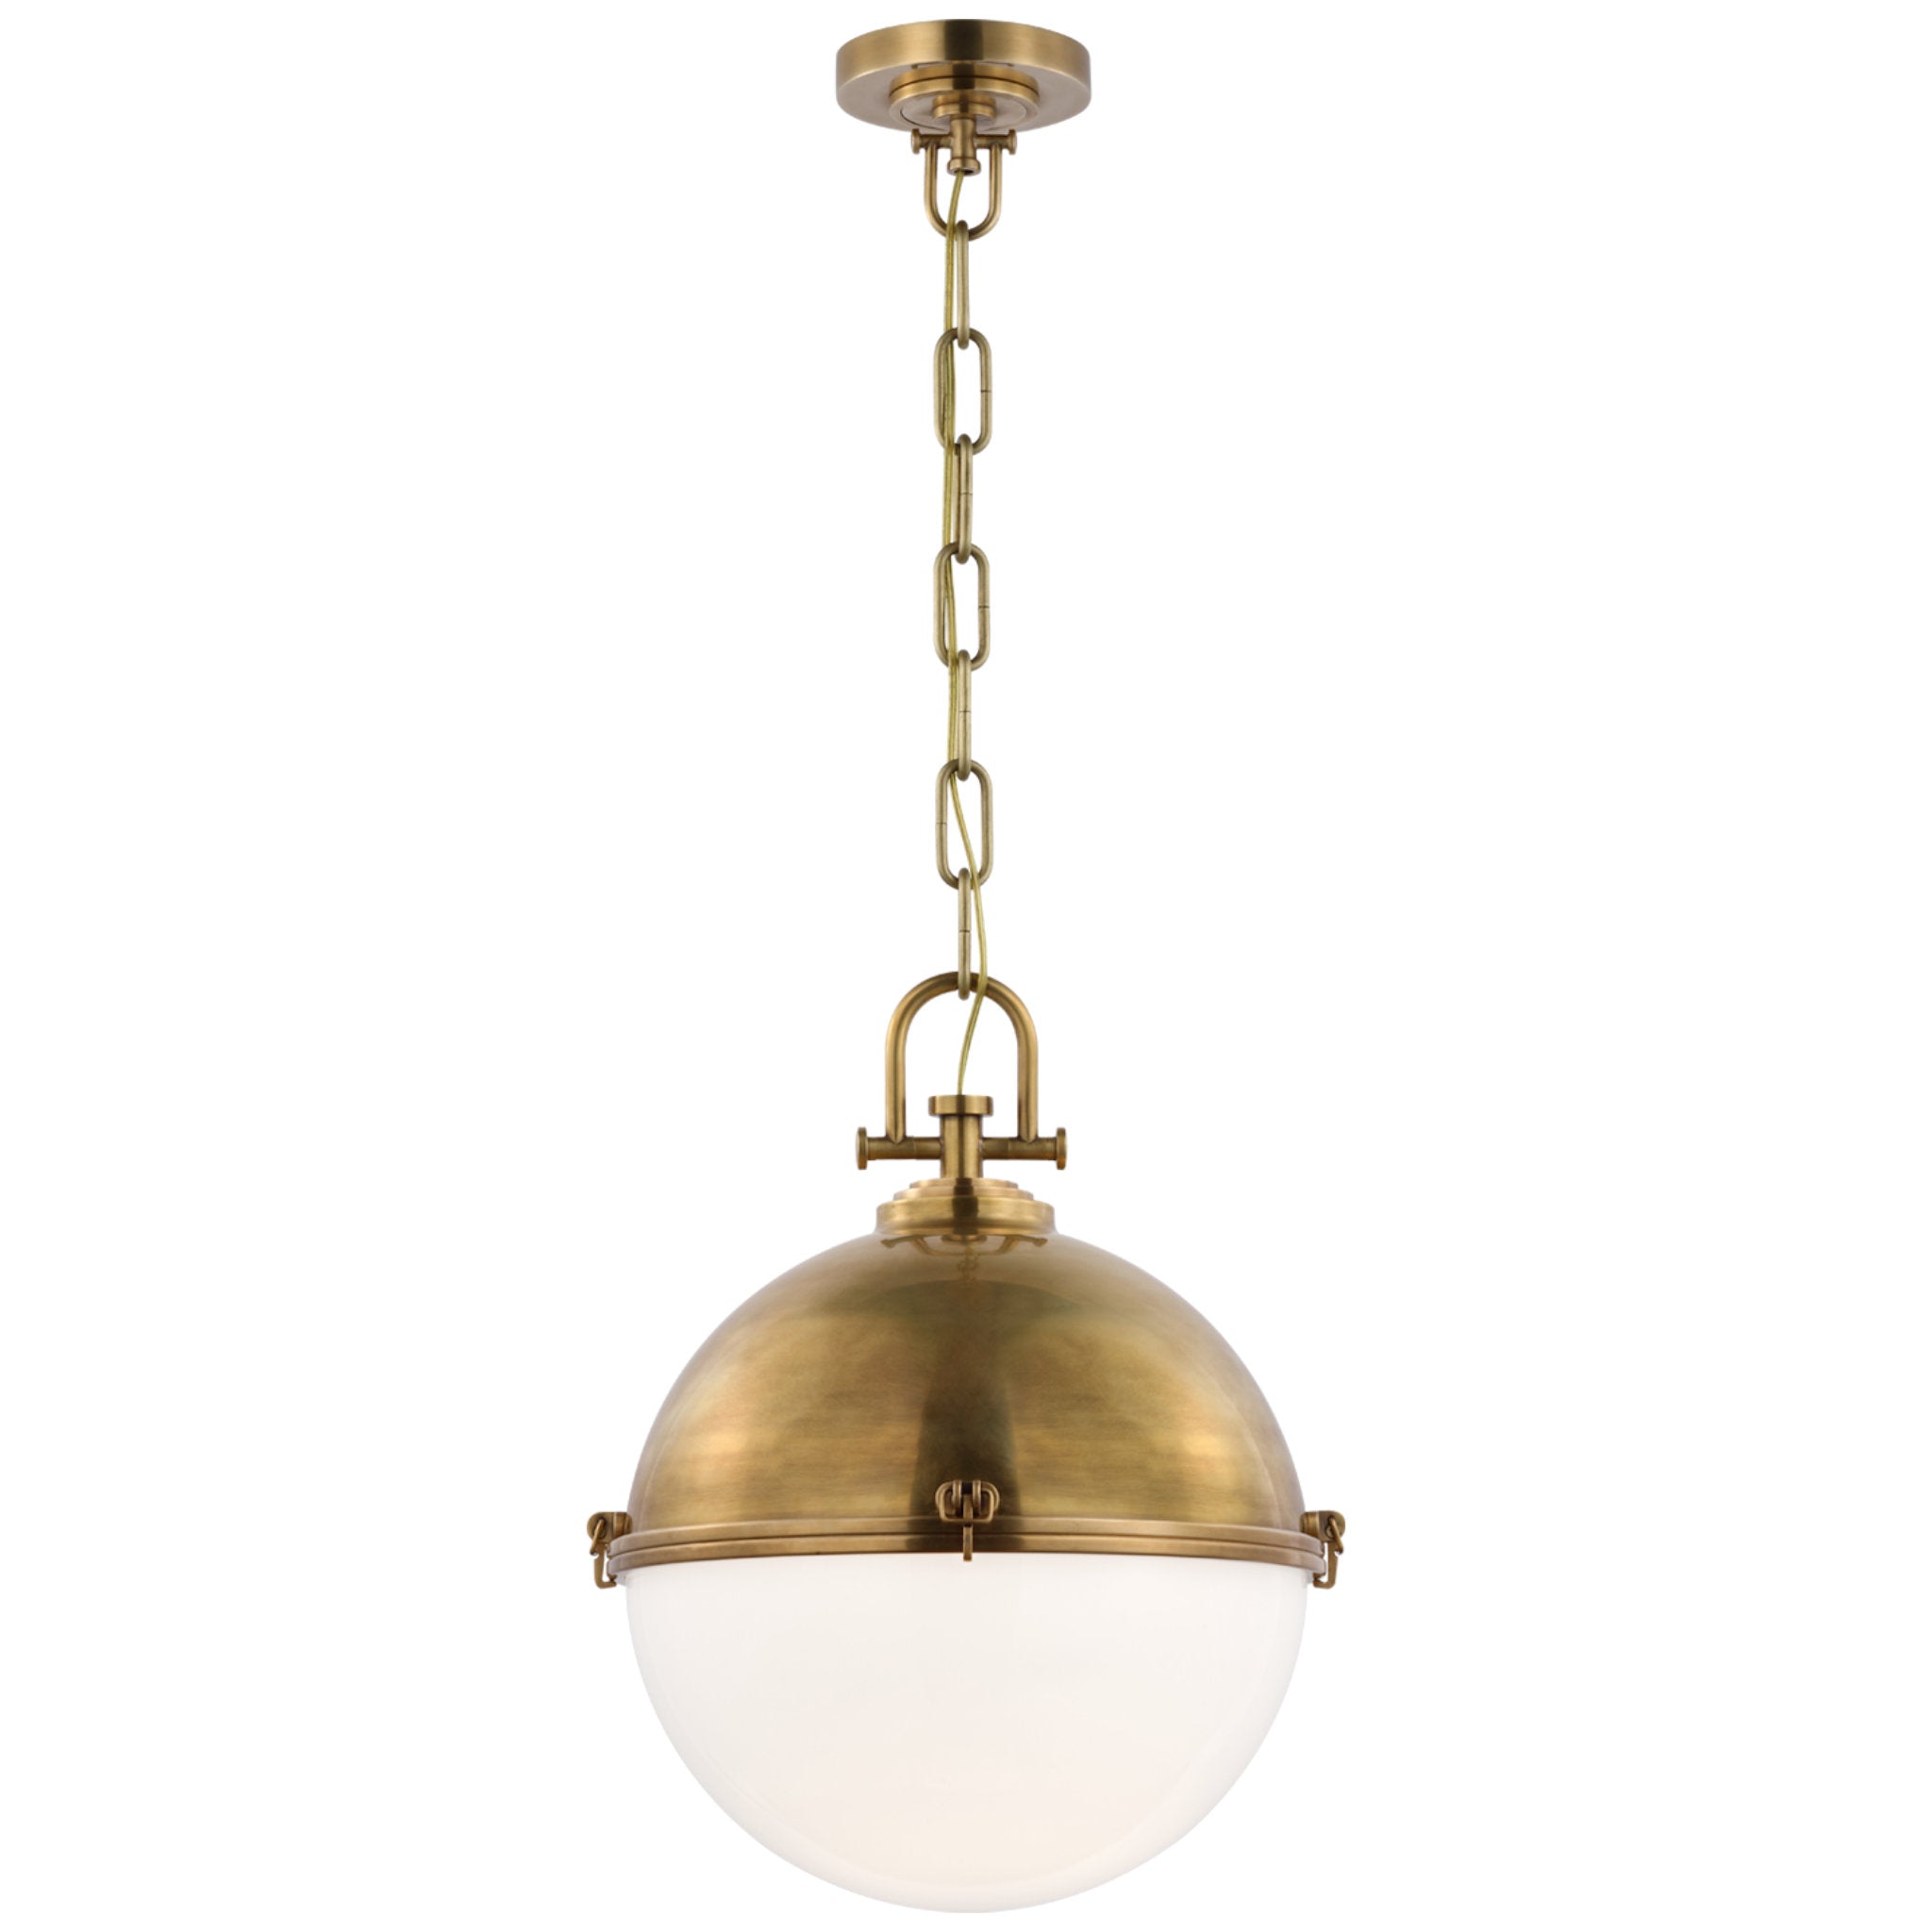 Chapman & Myers Adrian X-Large Globe Pendant in Antique-Burnished Brass with White Glass